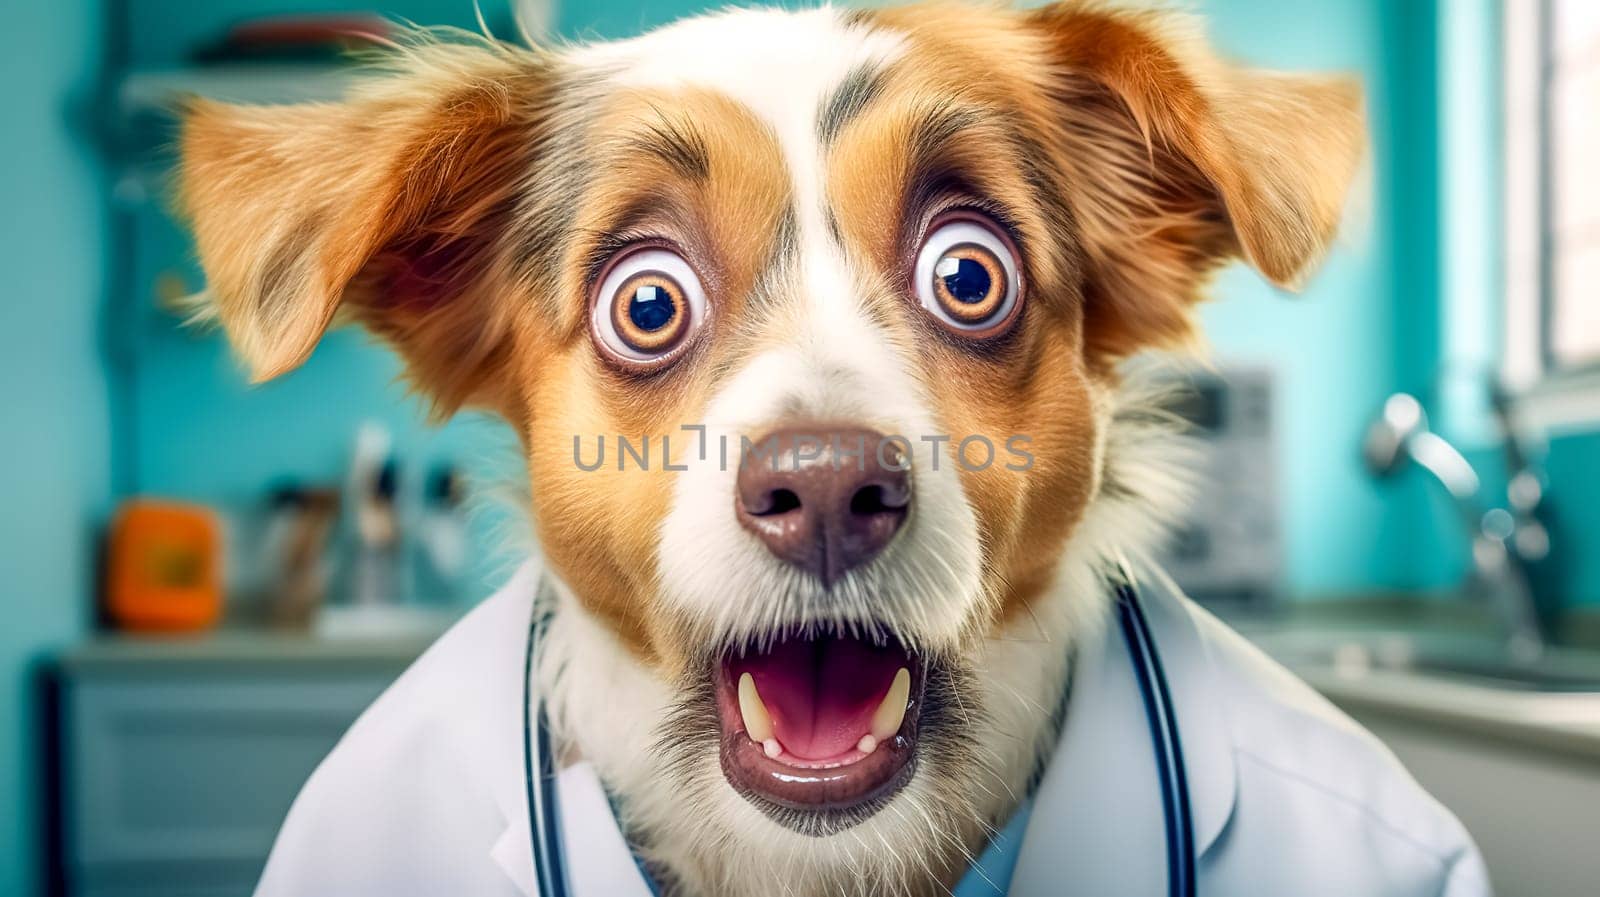 surprised appearance of a dog in a doctor's outfit in a veterinary clinic, Astonished expression.